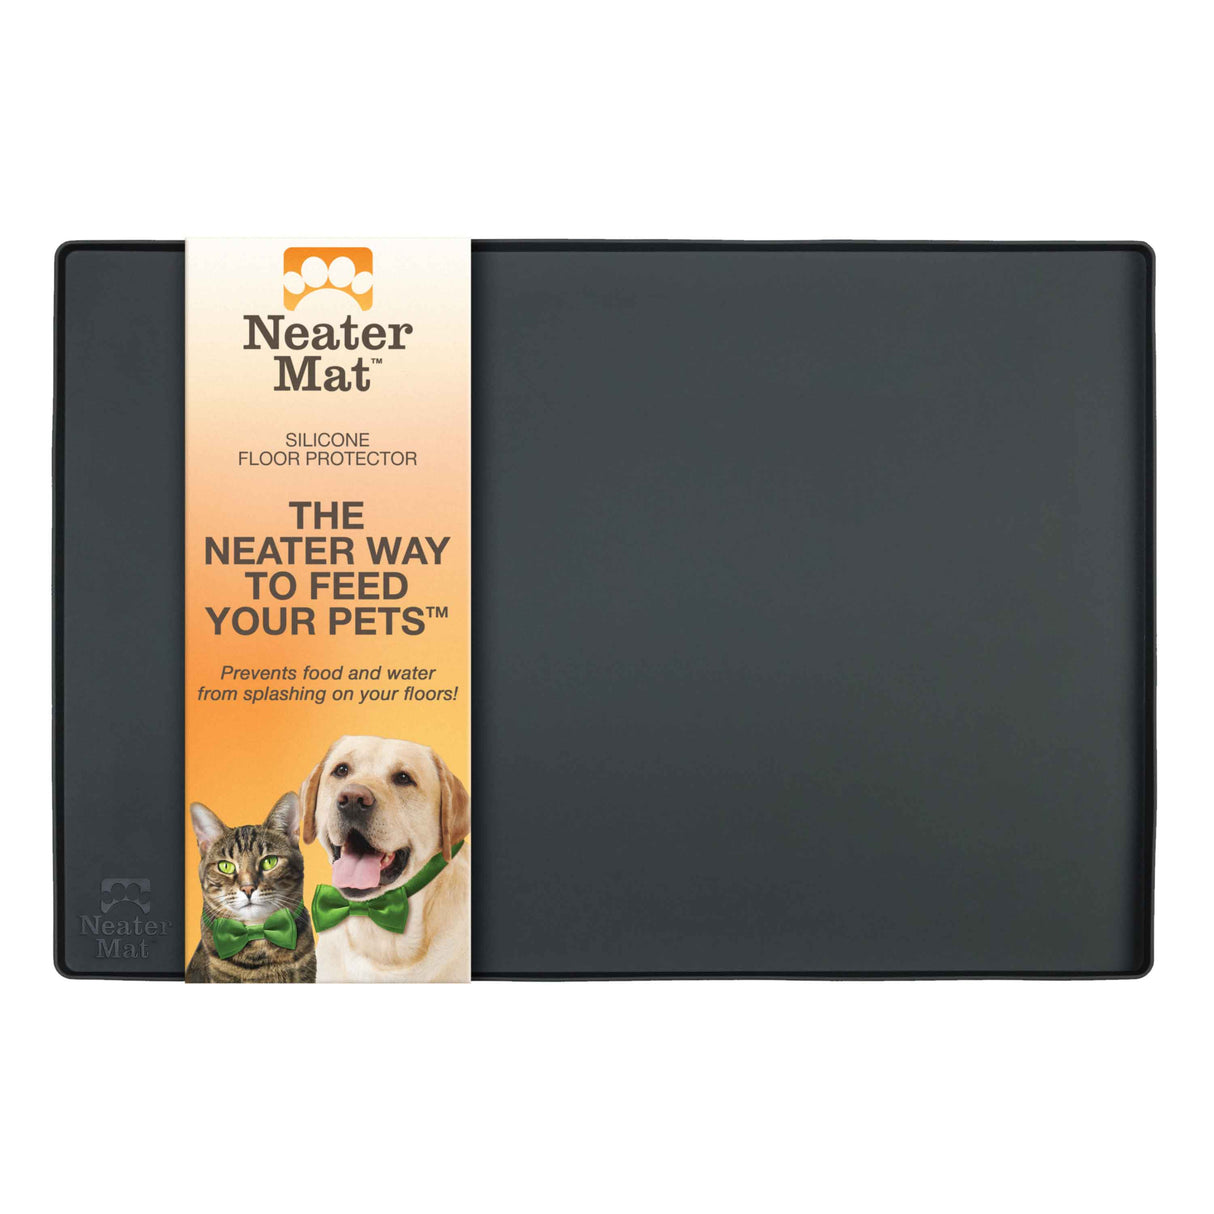 Neater Pet Brands Neater Mat - Waterproof Silicone Pet Bowls Mat - Protect Floors from Food & Water (Midnight Black, 24 x 16 Silicone)